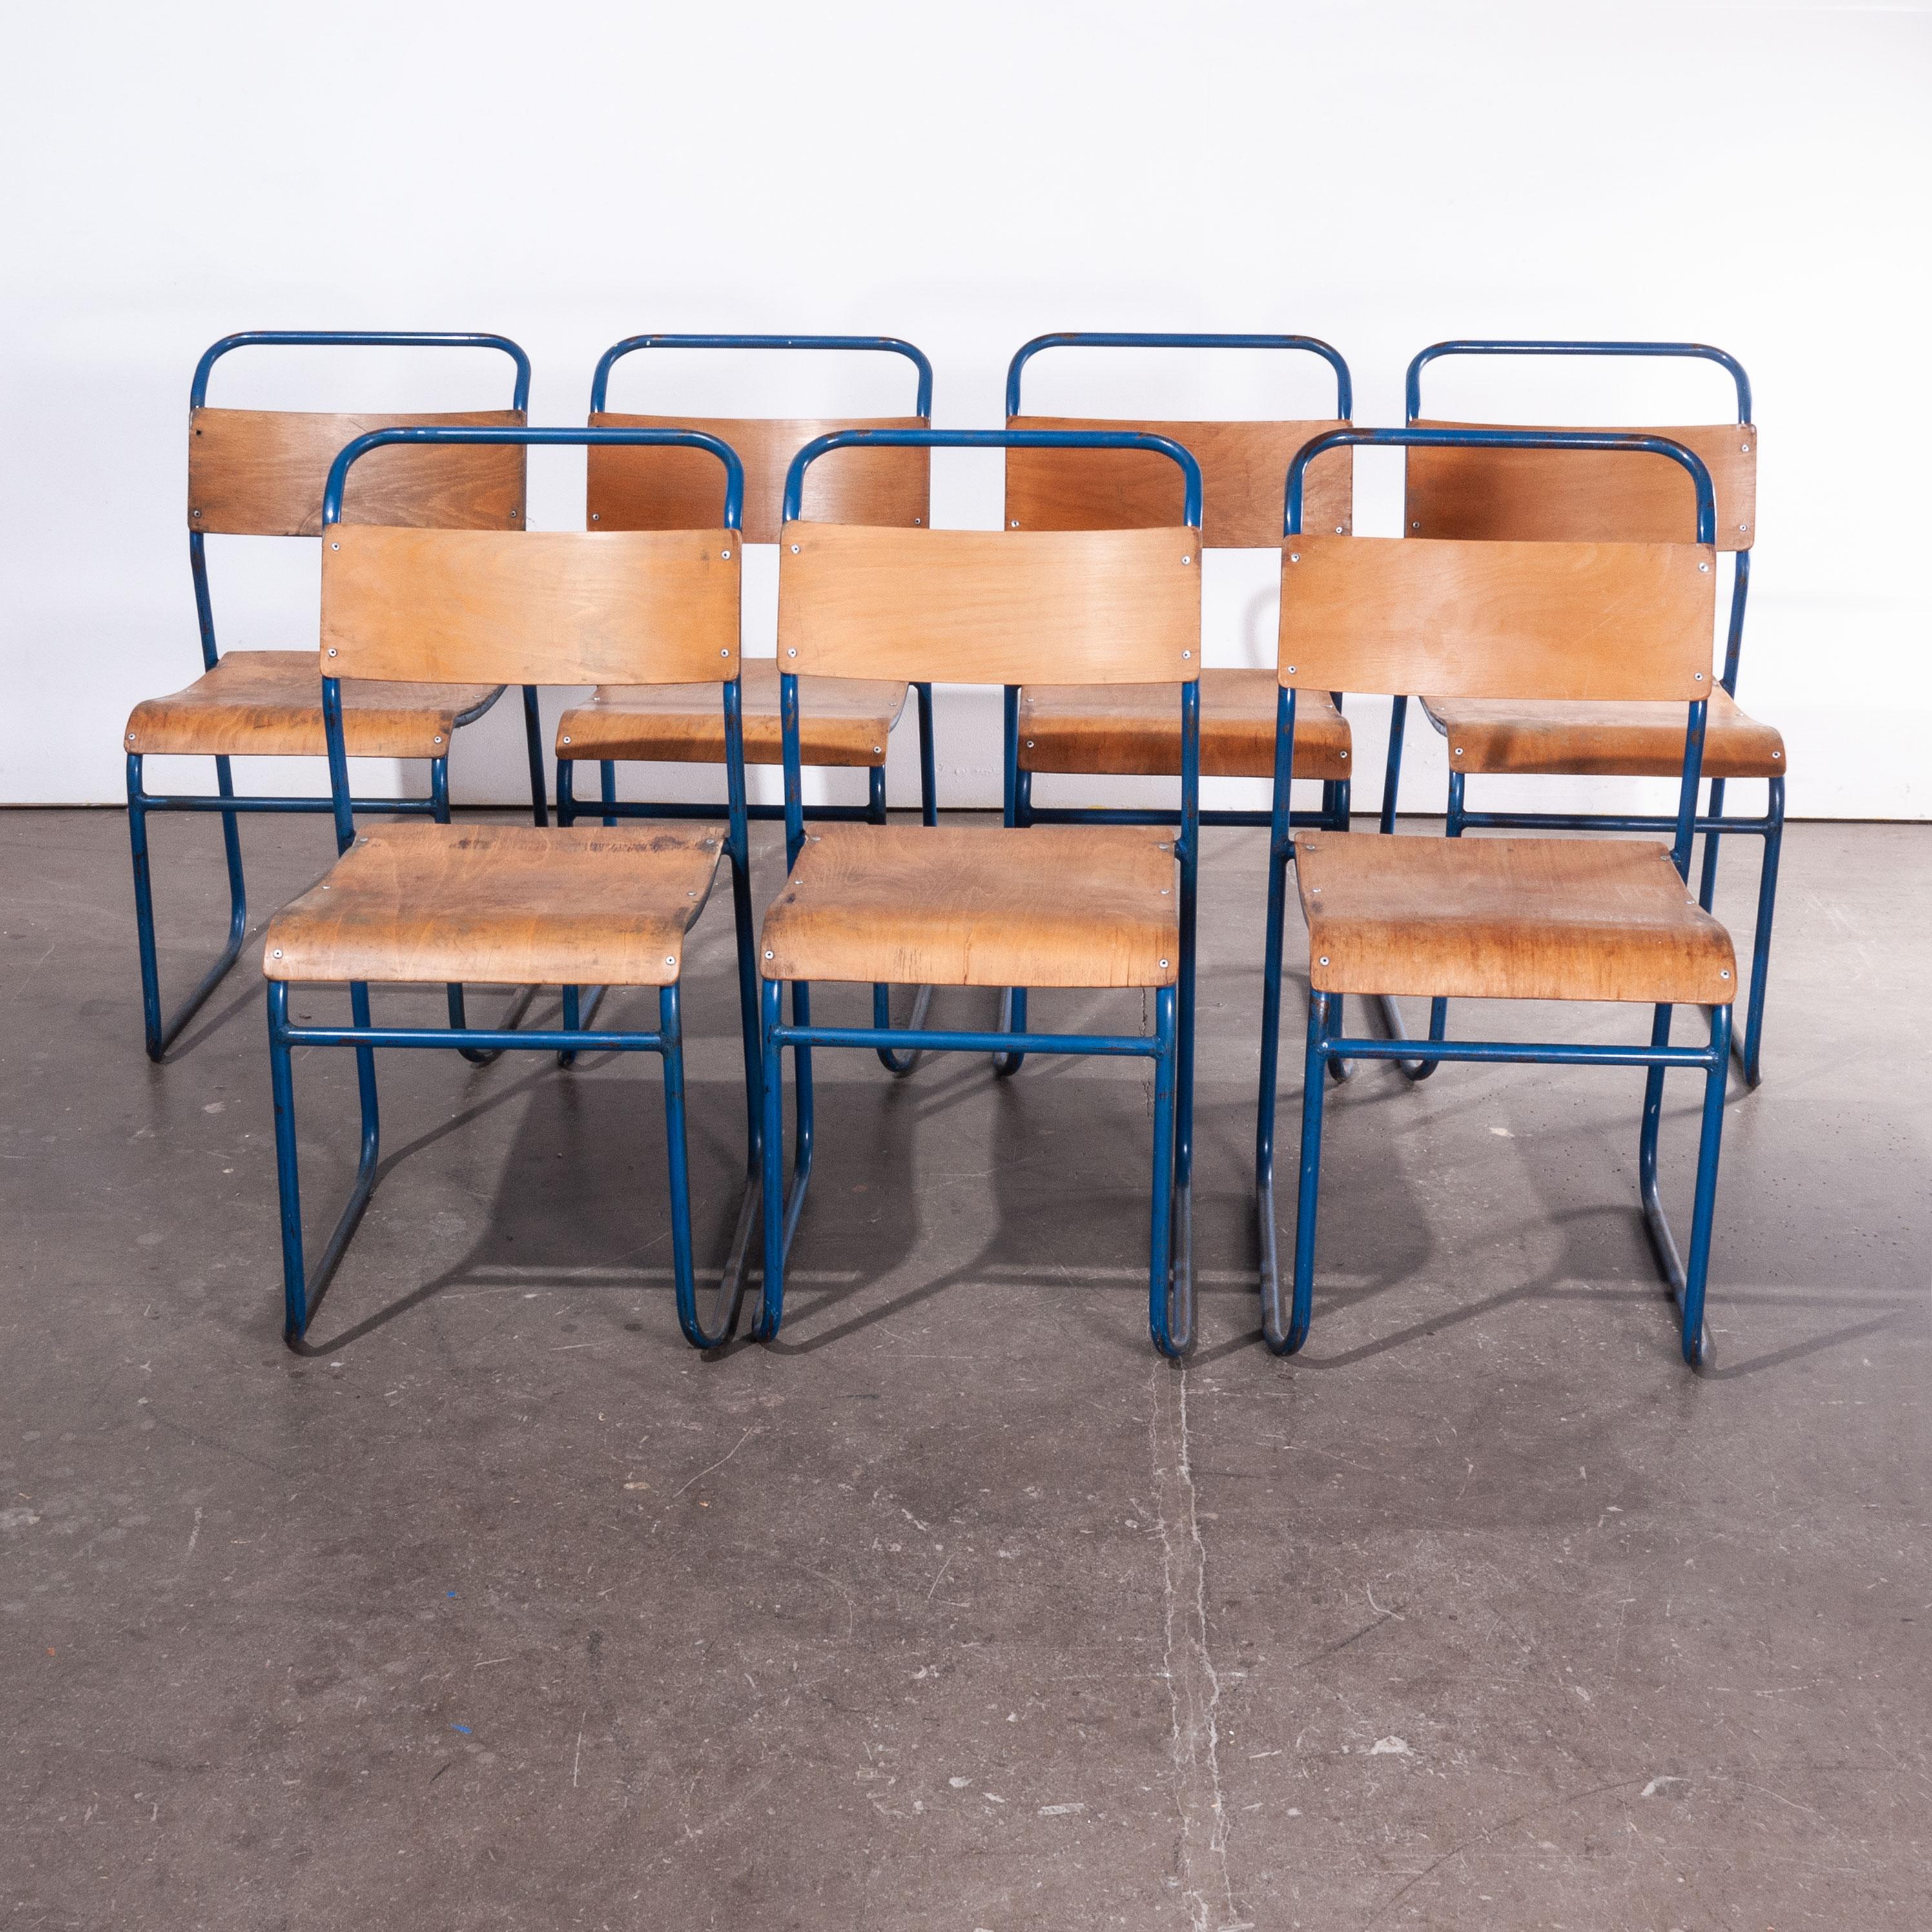 Mid-20th Century 1950's Remploy Tubular Metal Stacking Dining Chairs, Set of Twenty Four